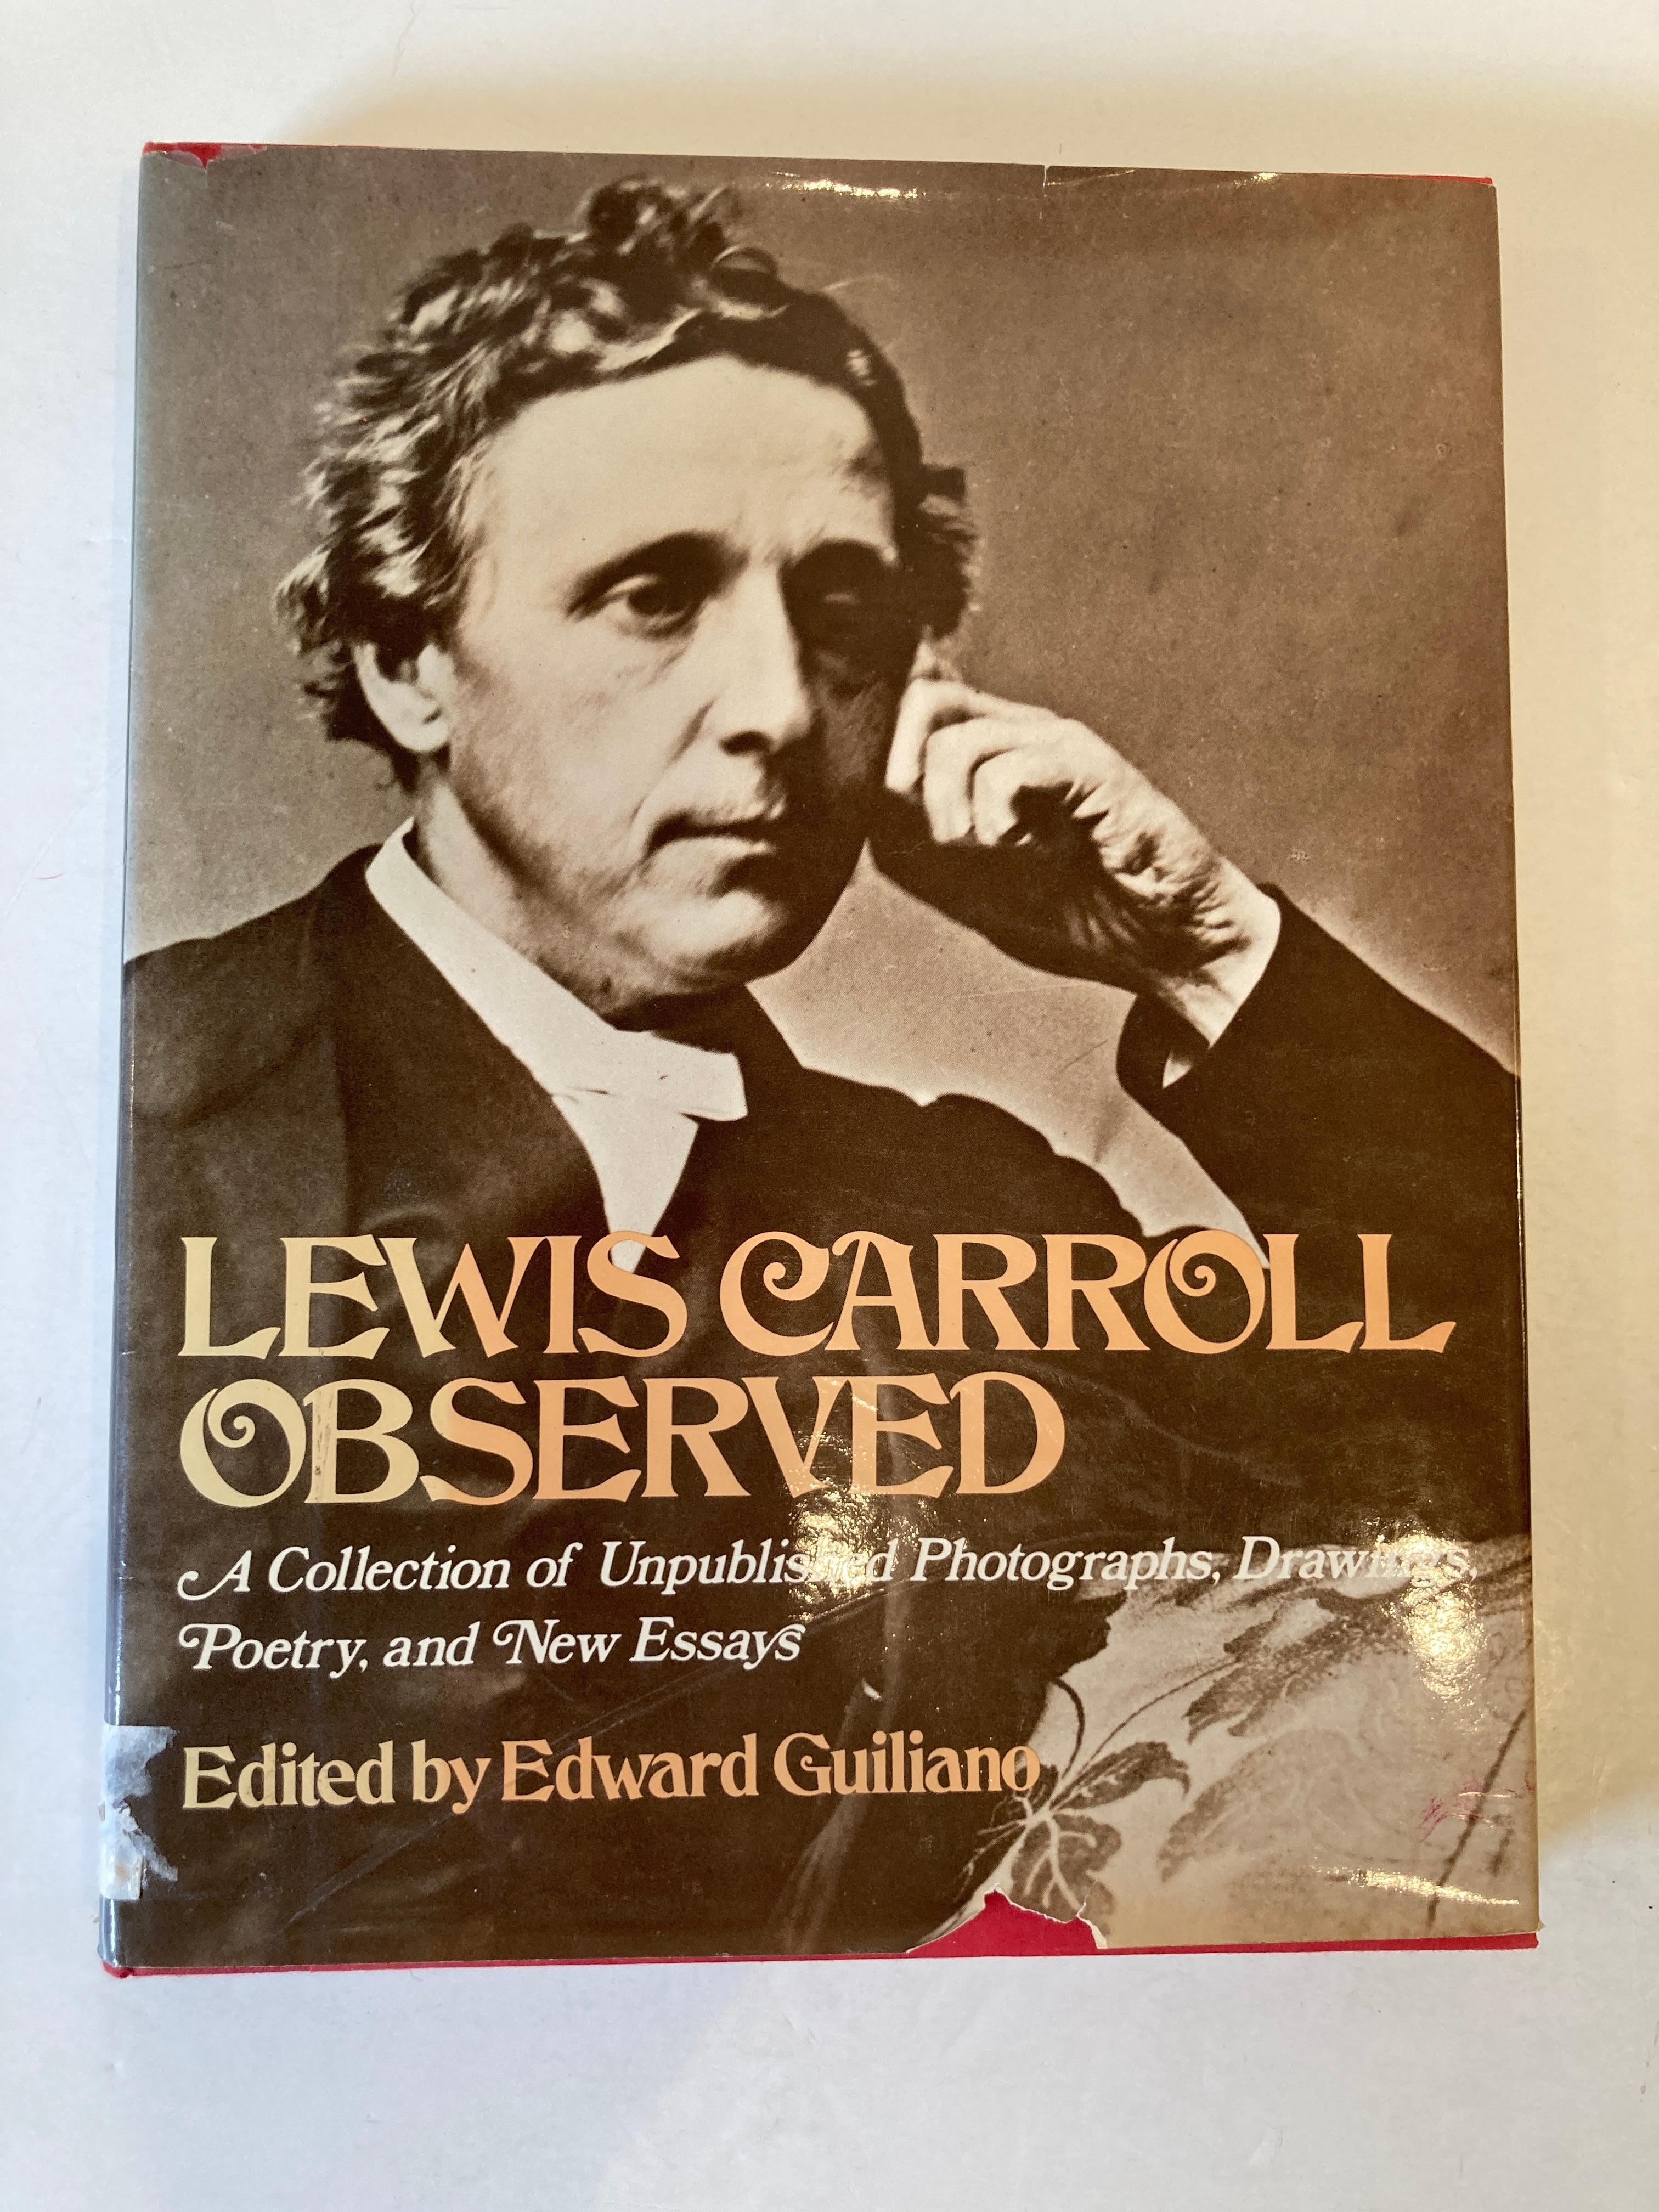 Lewis Carroll Observed A Collection of Unpublished Photographs, Drawings, Poetry and New Essays.
GUILIANO, Edward edited by
Published by Clarkson N. Potter, New York, 1976
An anthology of 15 new essays on all aspects of Carroll's art, his major